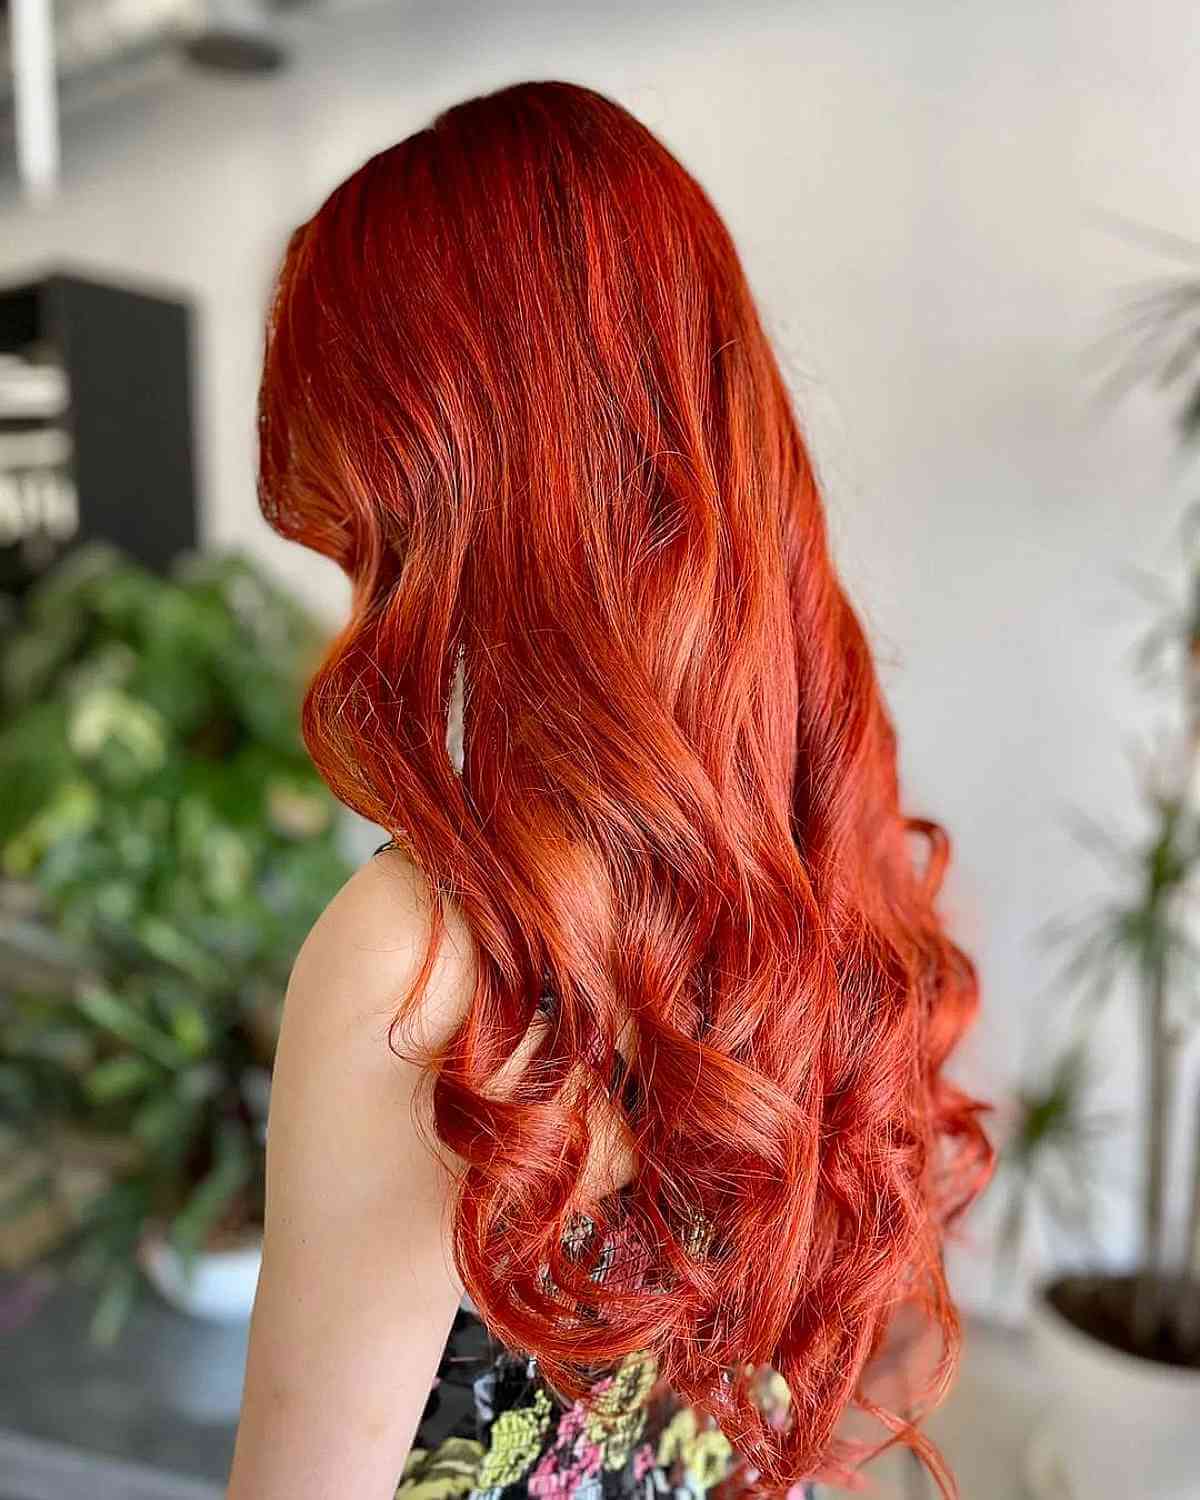 Long Loose Curls with Bright Red Copper Tone